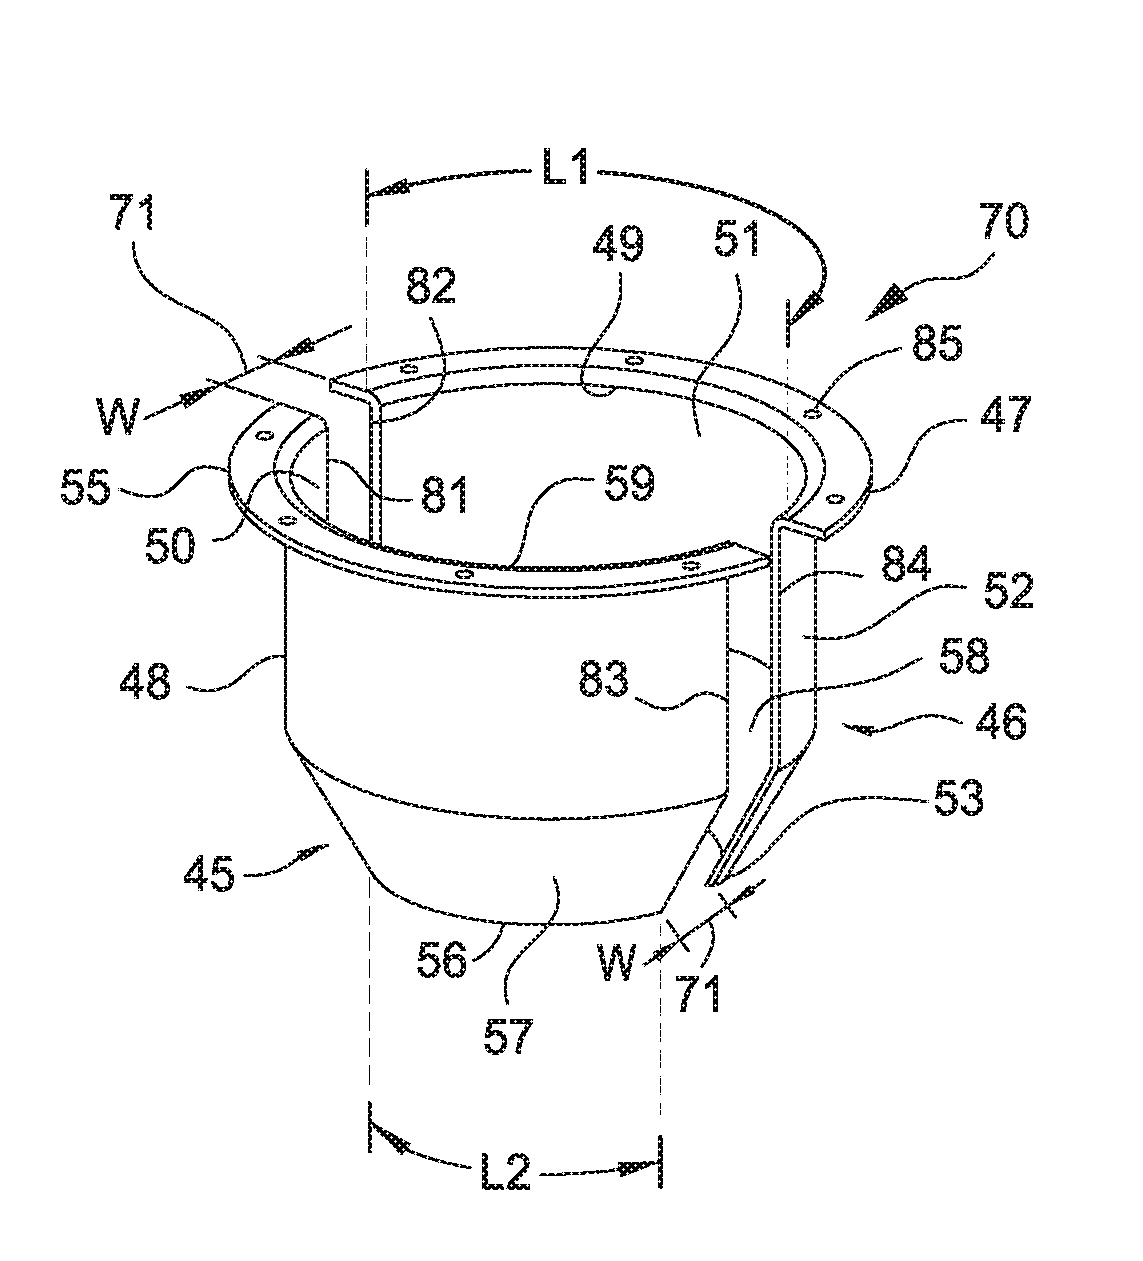 Upper cone for epitaxy chamber